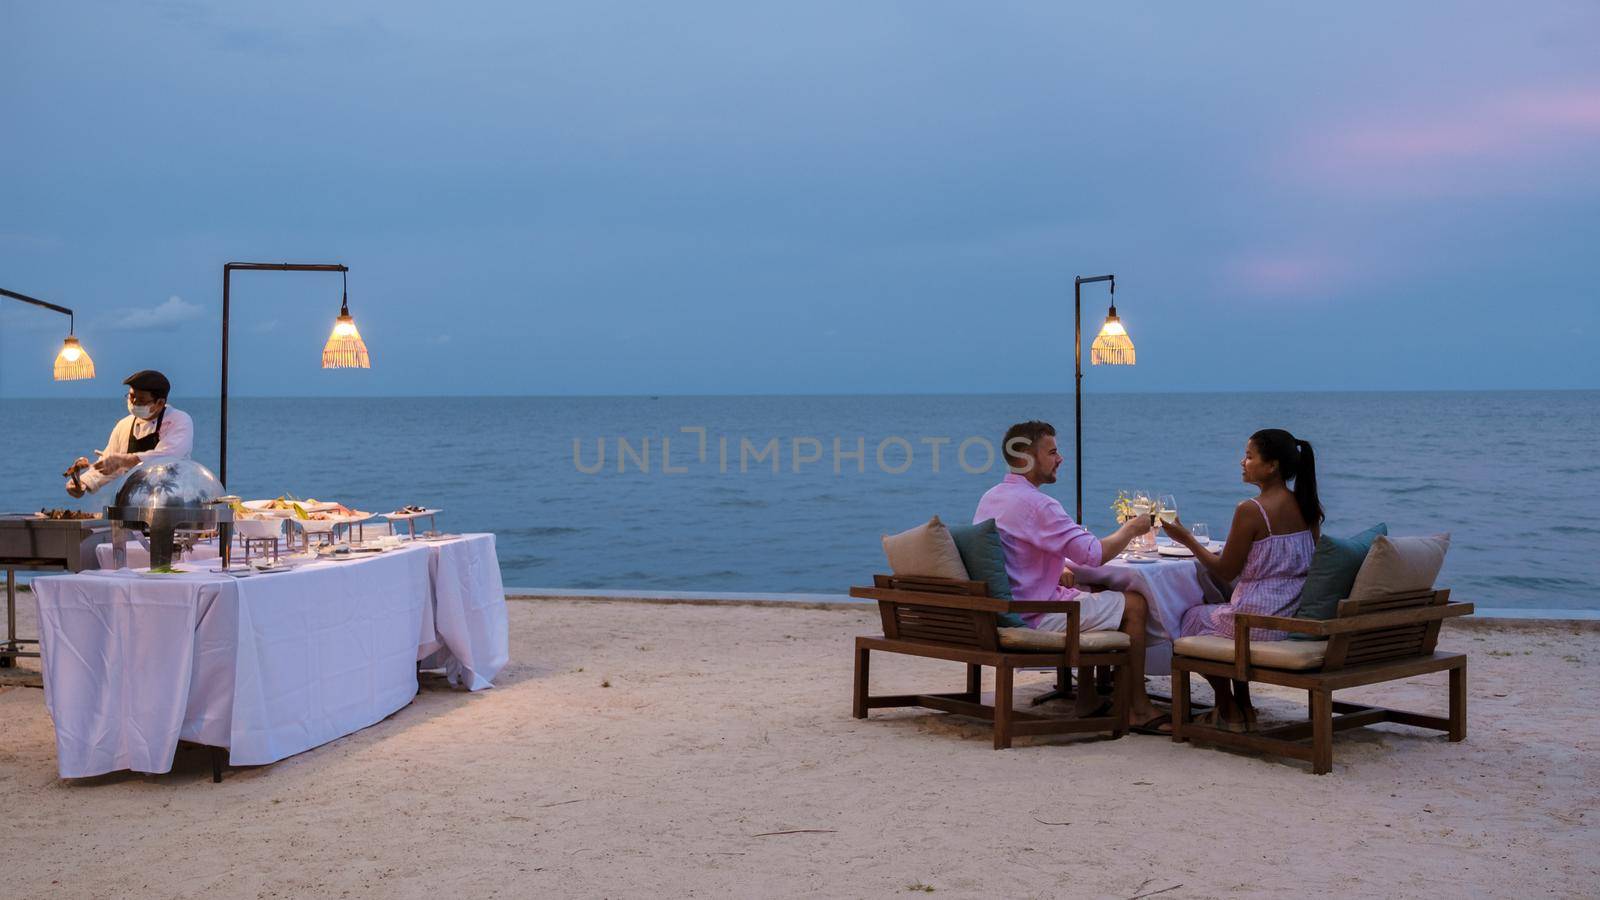 A couple of men and women having a romantic dinner on the beach in the evening. Asian women and Caucasian men having dinner on the beach of Huahin Thailand